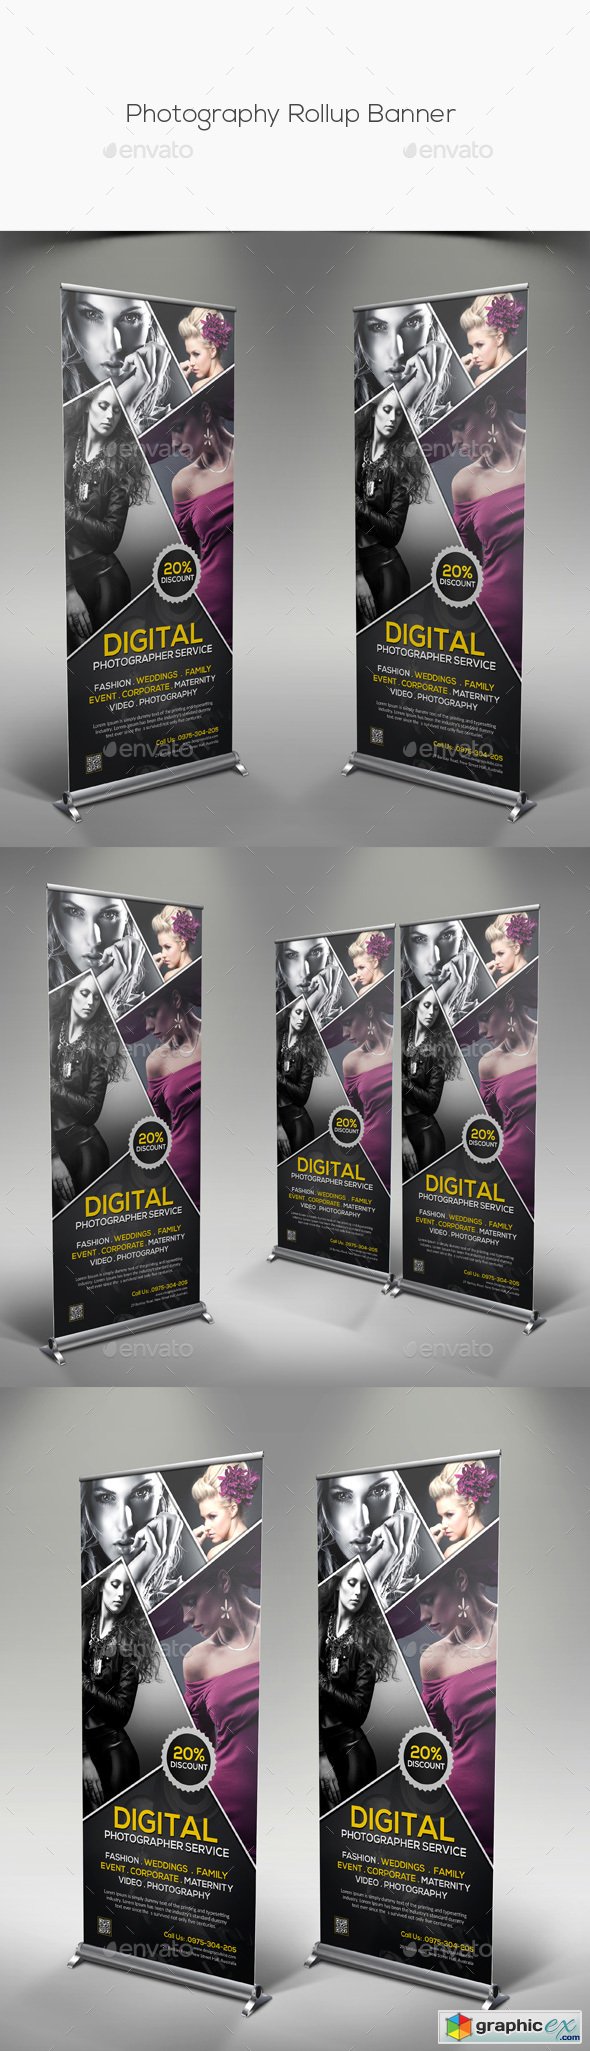 Photography Rollup Banner 14934041